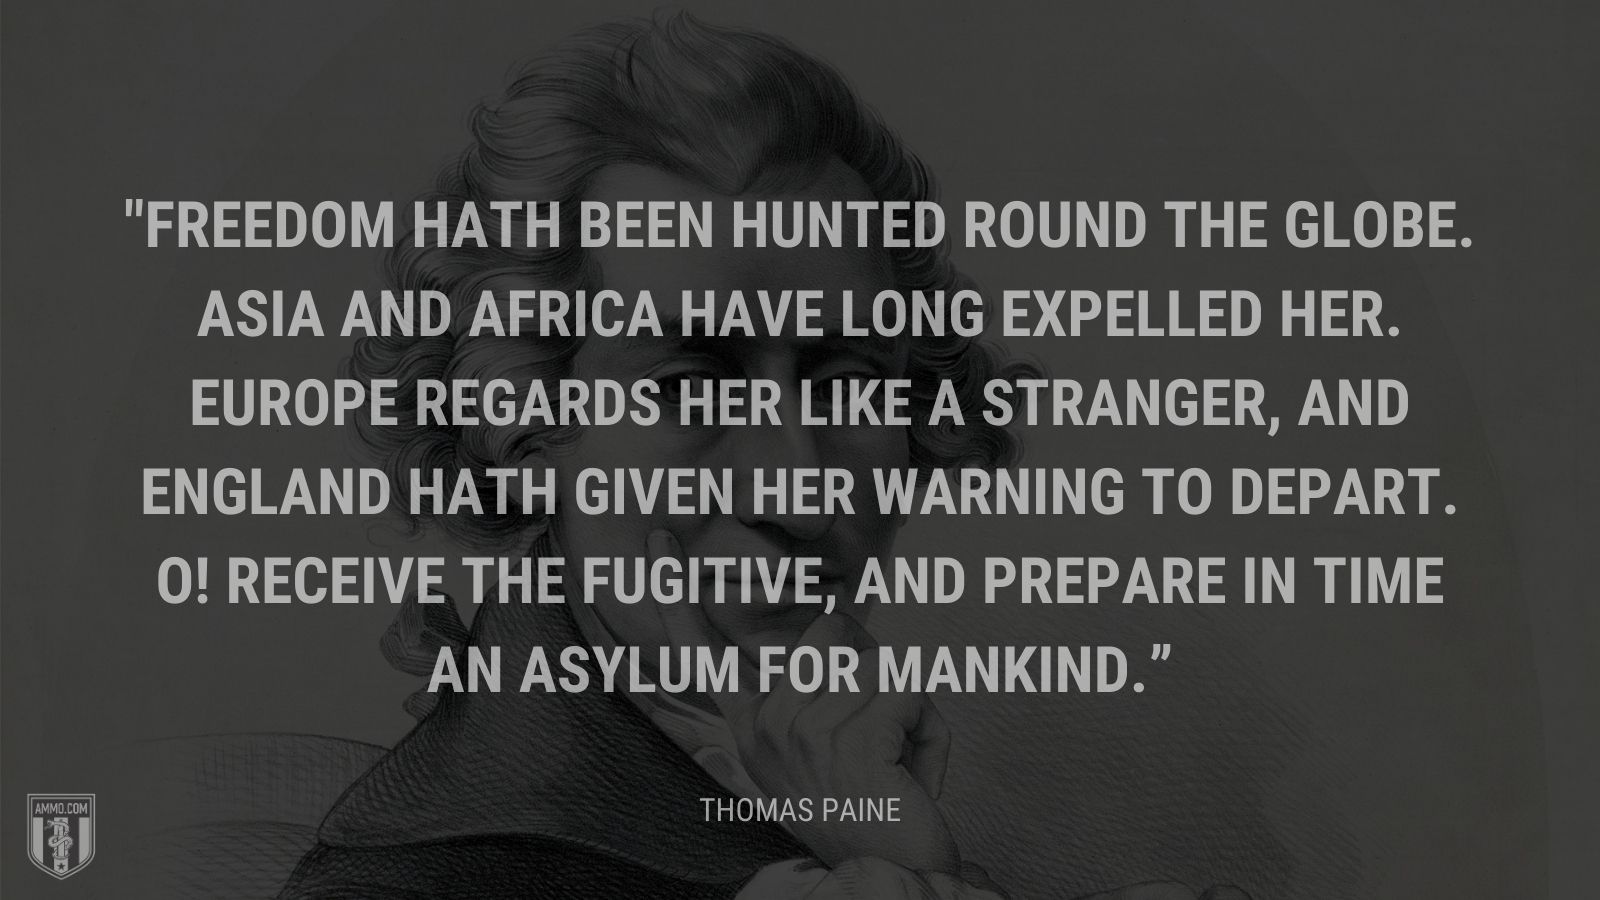 “Freedom hath been hunted round the globe. Asia and Africa have long expelled her. Europe regards her like a stranger, and England hath given her warning to depart. O! Receive the fugitive, and prepare in time an asylum for mankind.” - Thomas Paine